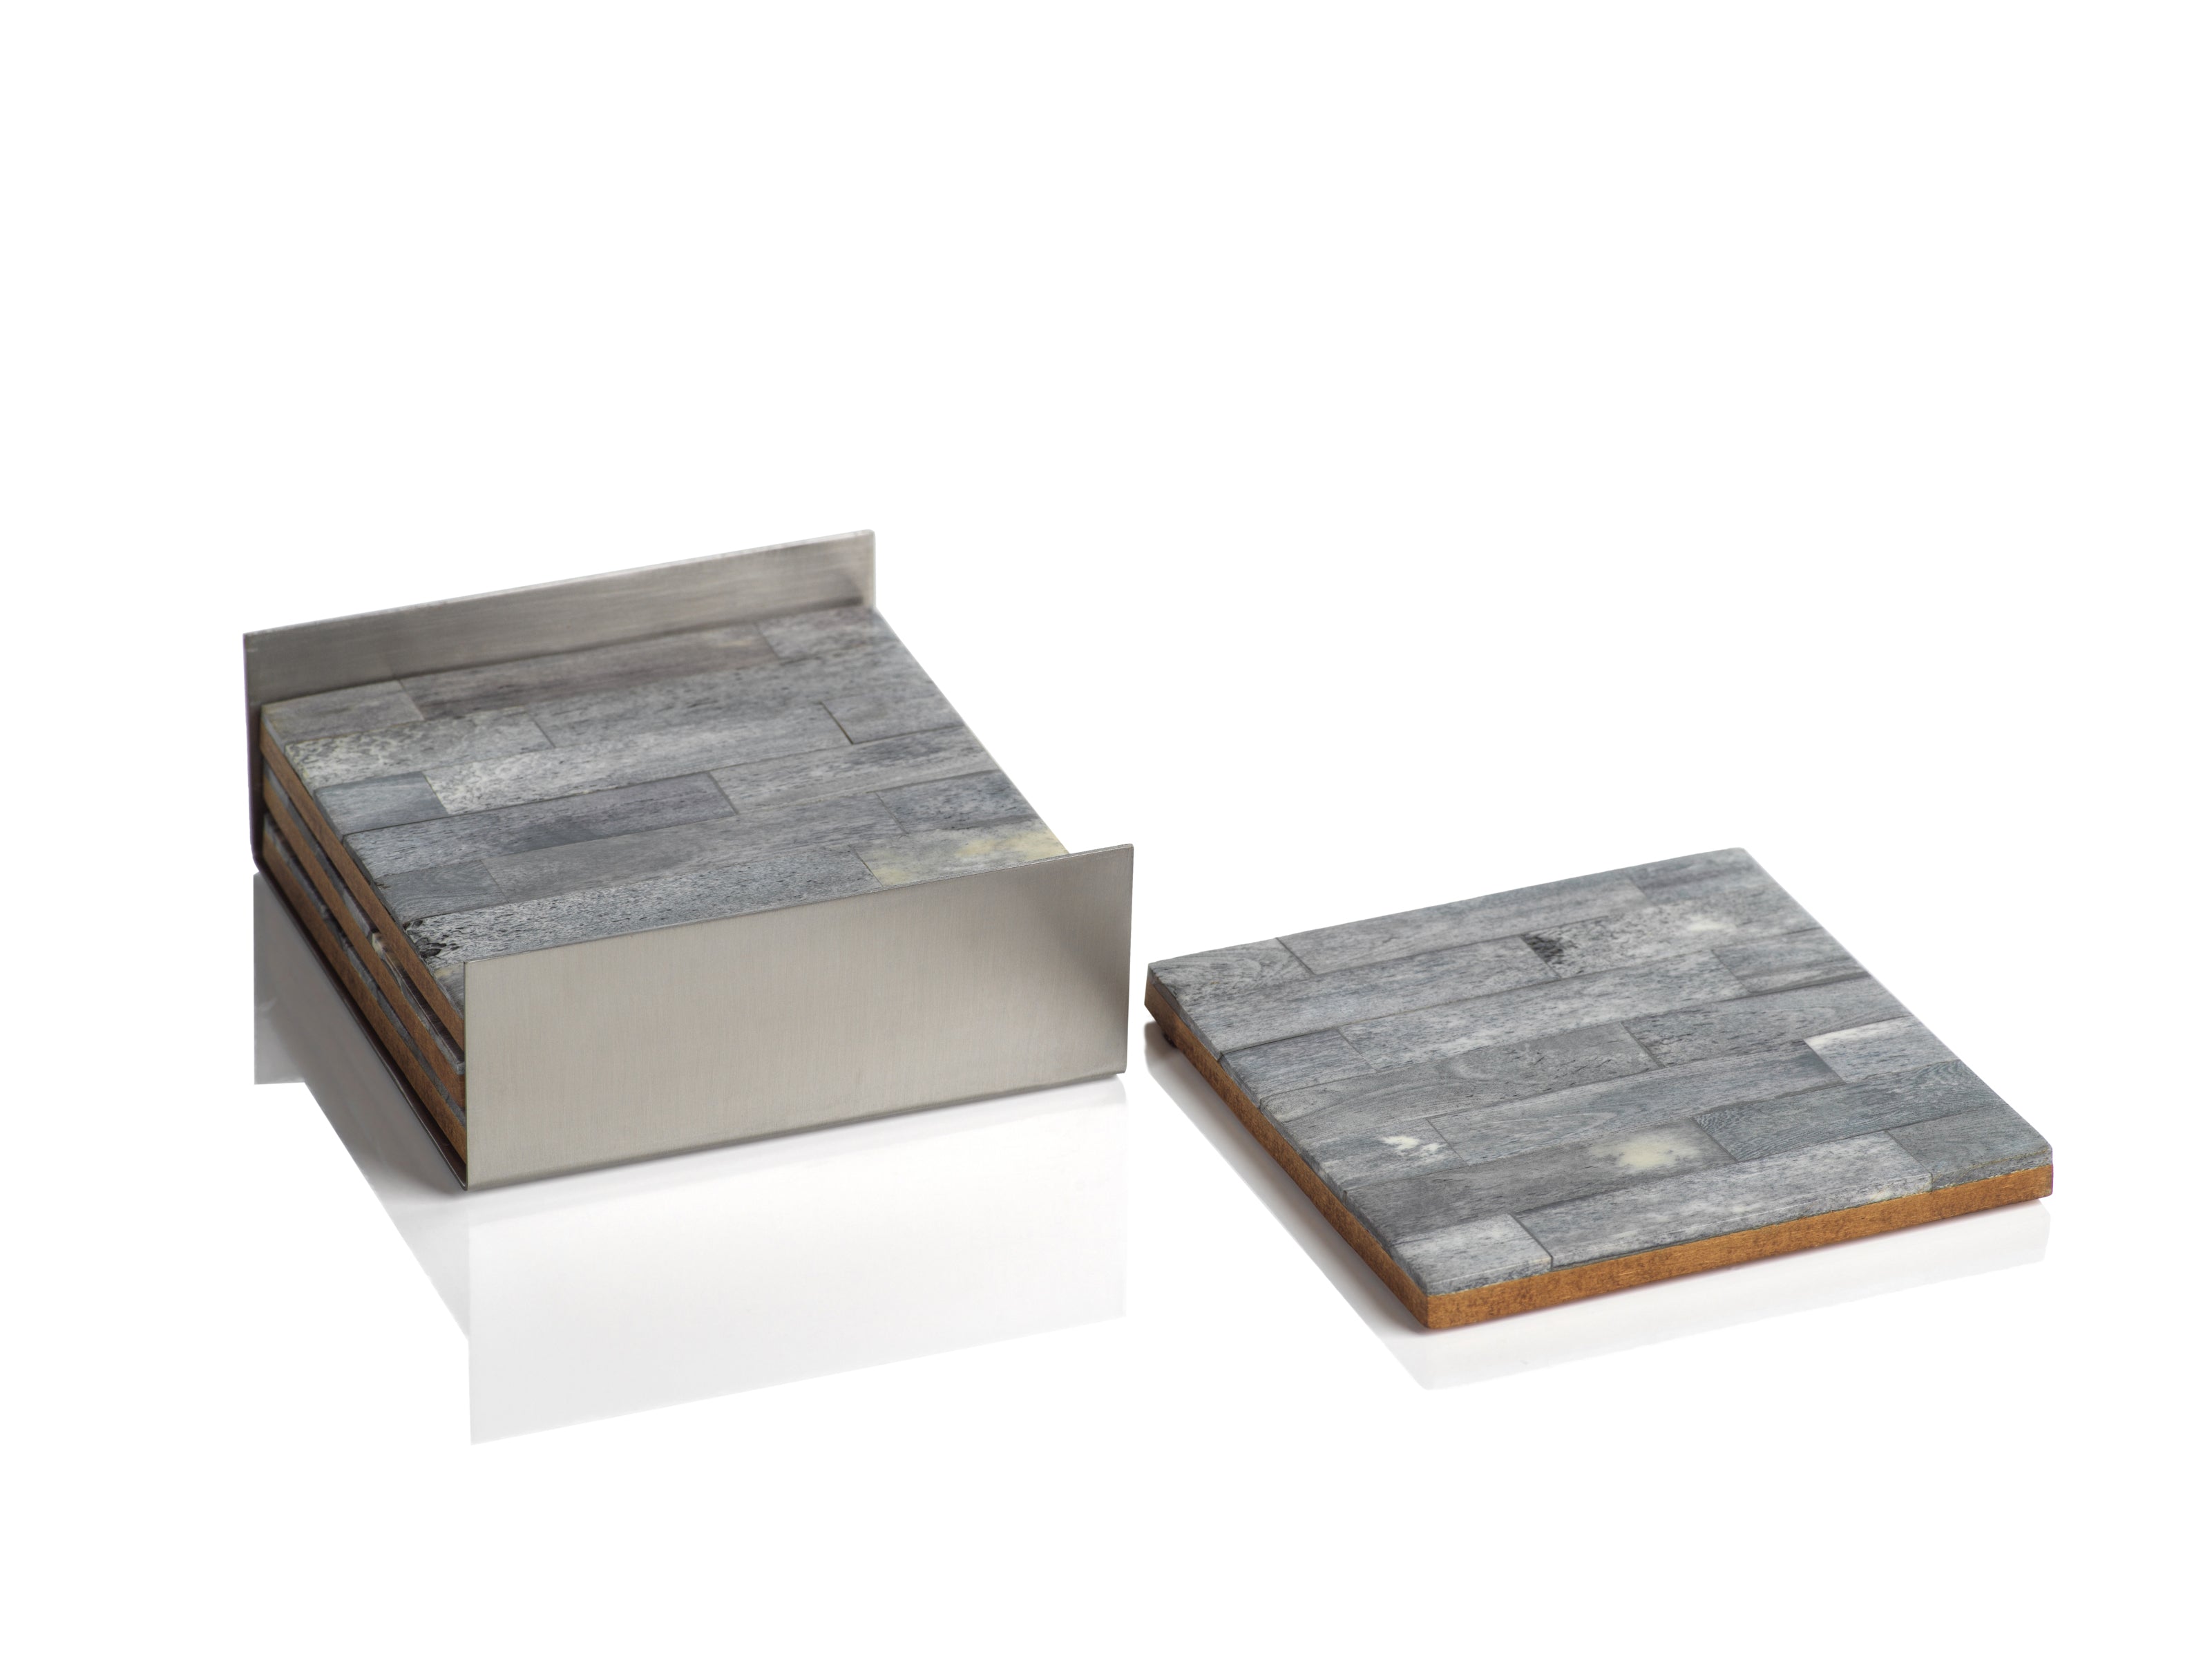 Set of 4 Coasters on Metal Tray - Grey/Silver - CARLYLE AVENUE